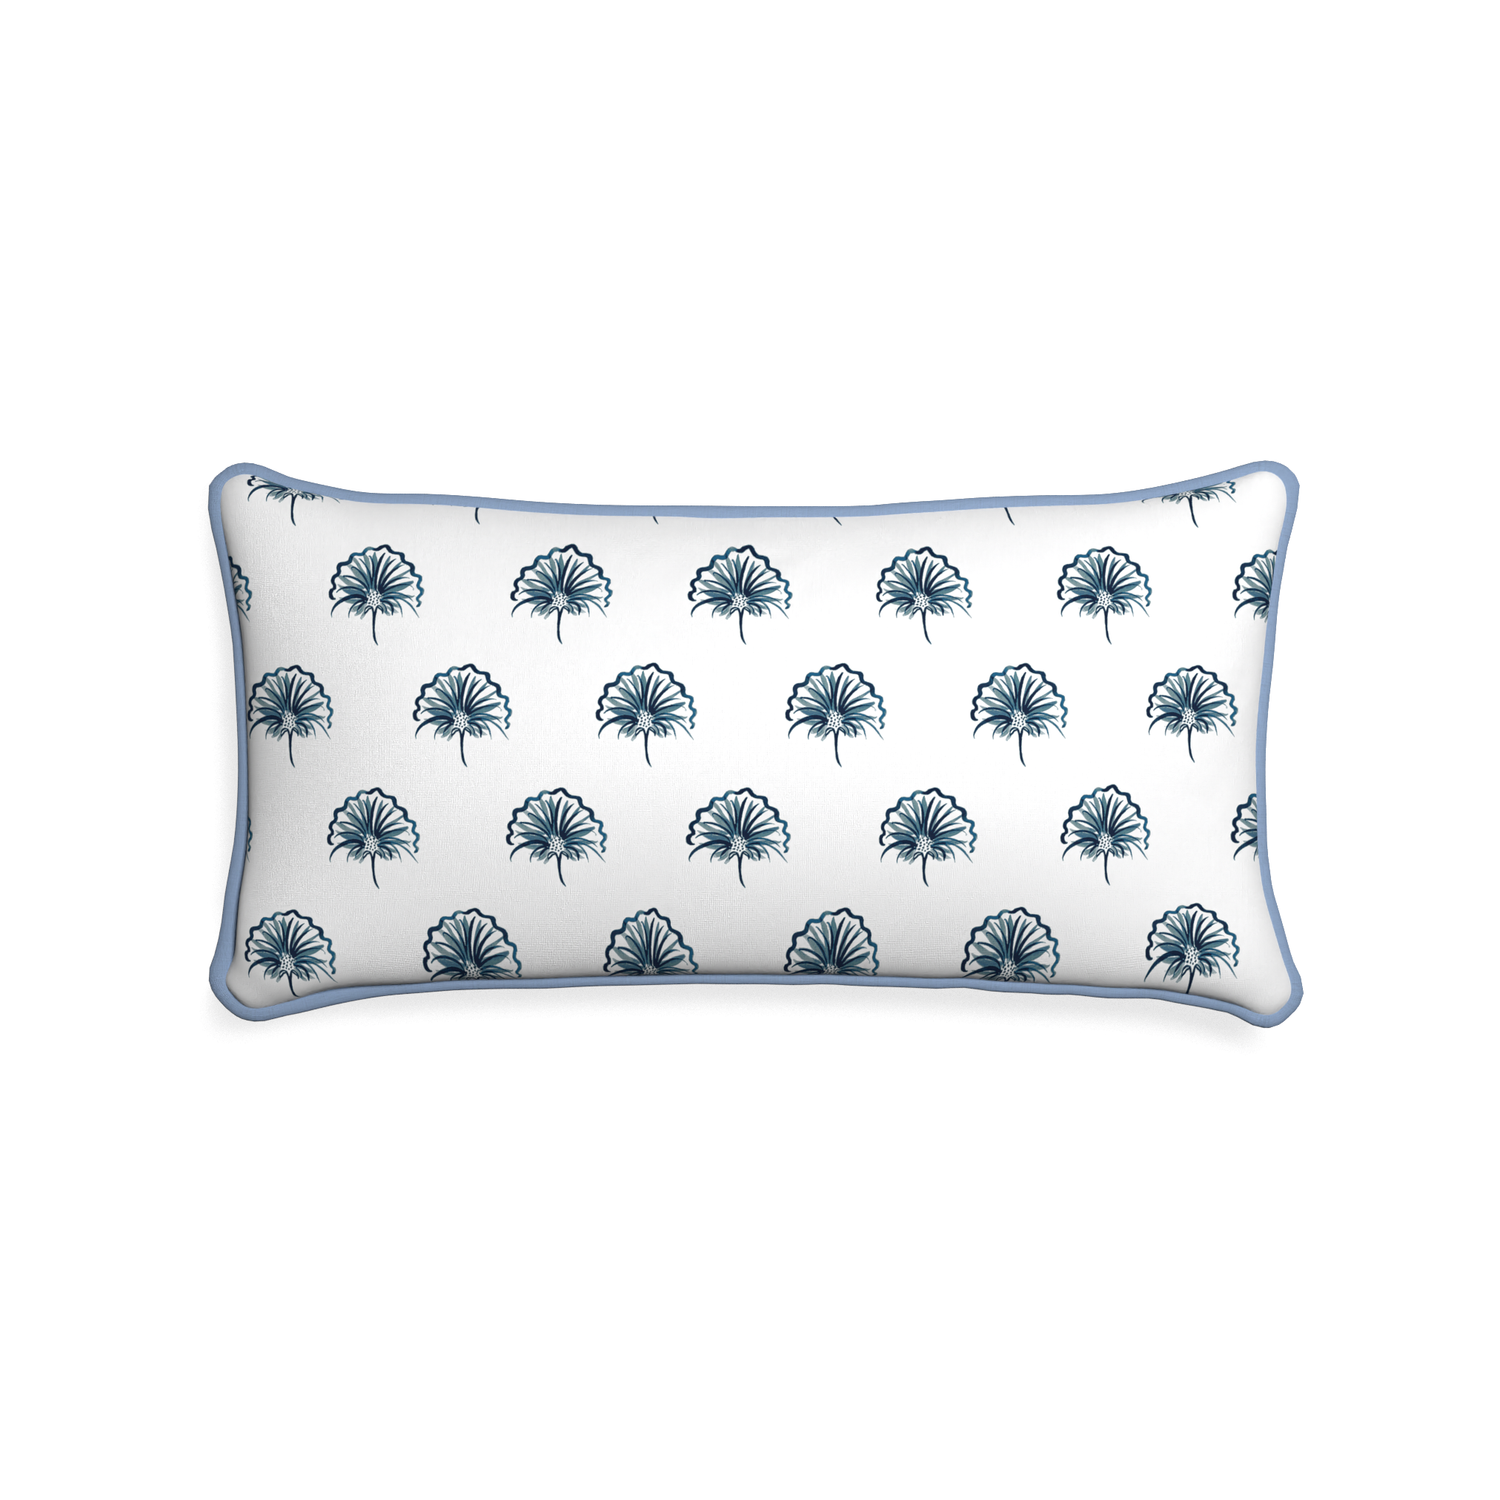 Midi-lumbar penelope midnight custom floral navypillow with sky piping on white background